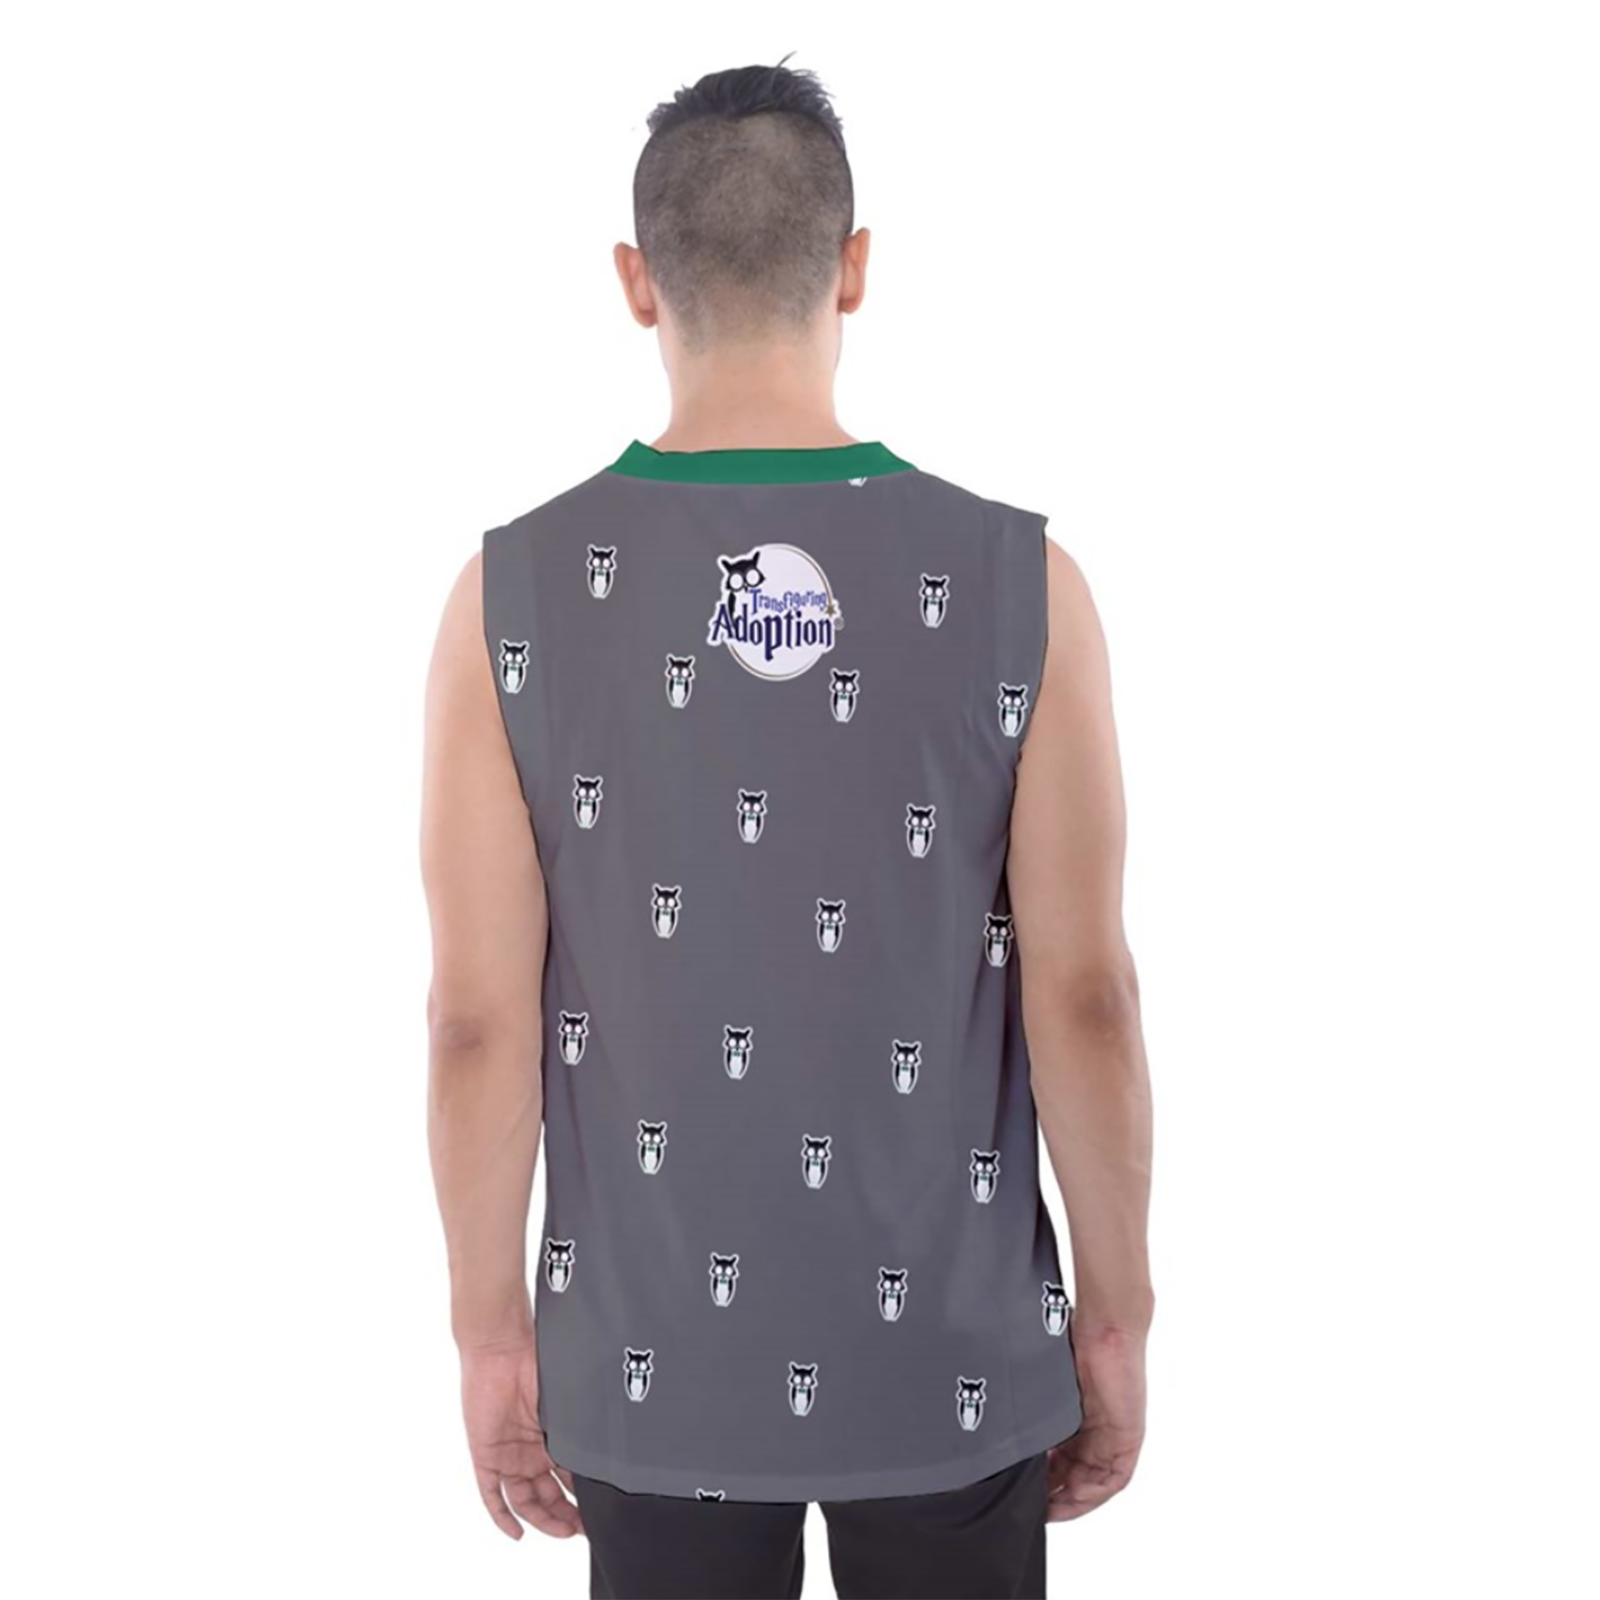 Green/Gray Owl Men's Tank Top - Inspired by Slytherin